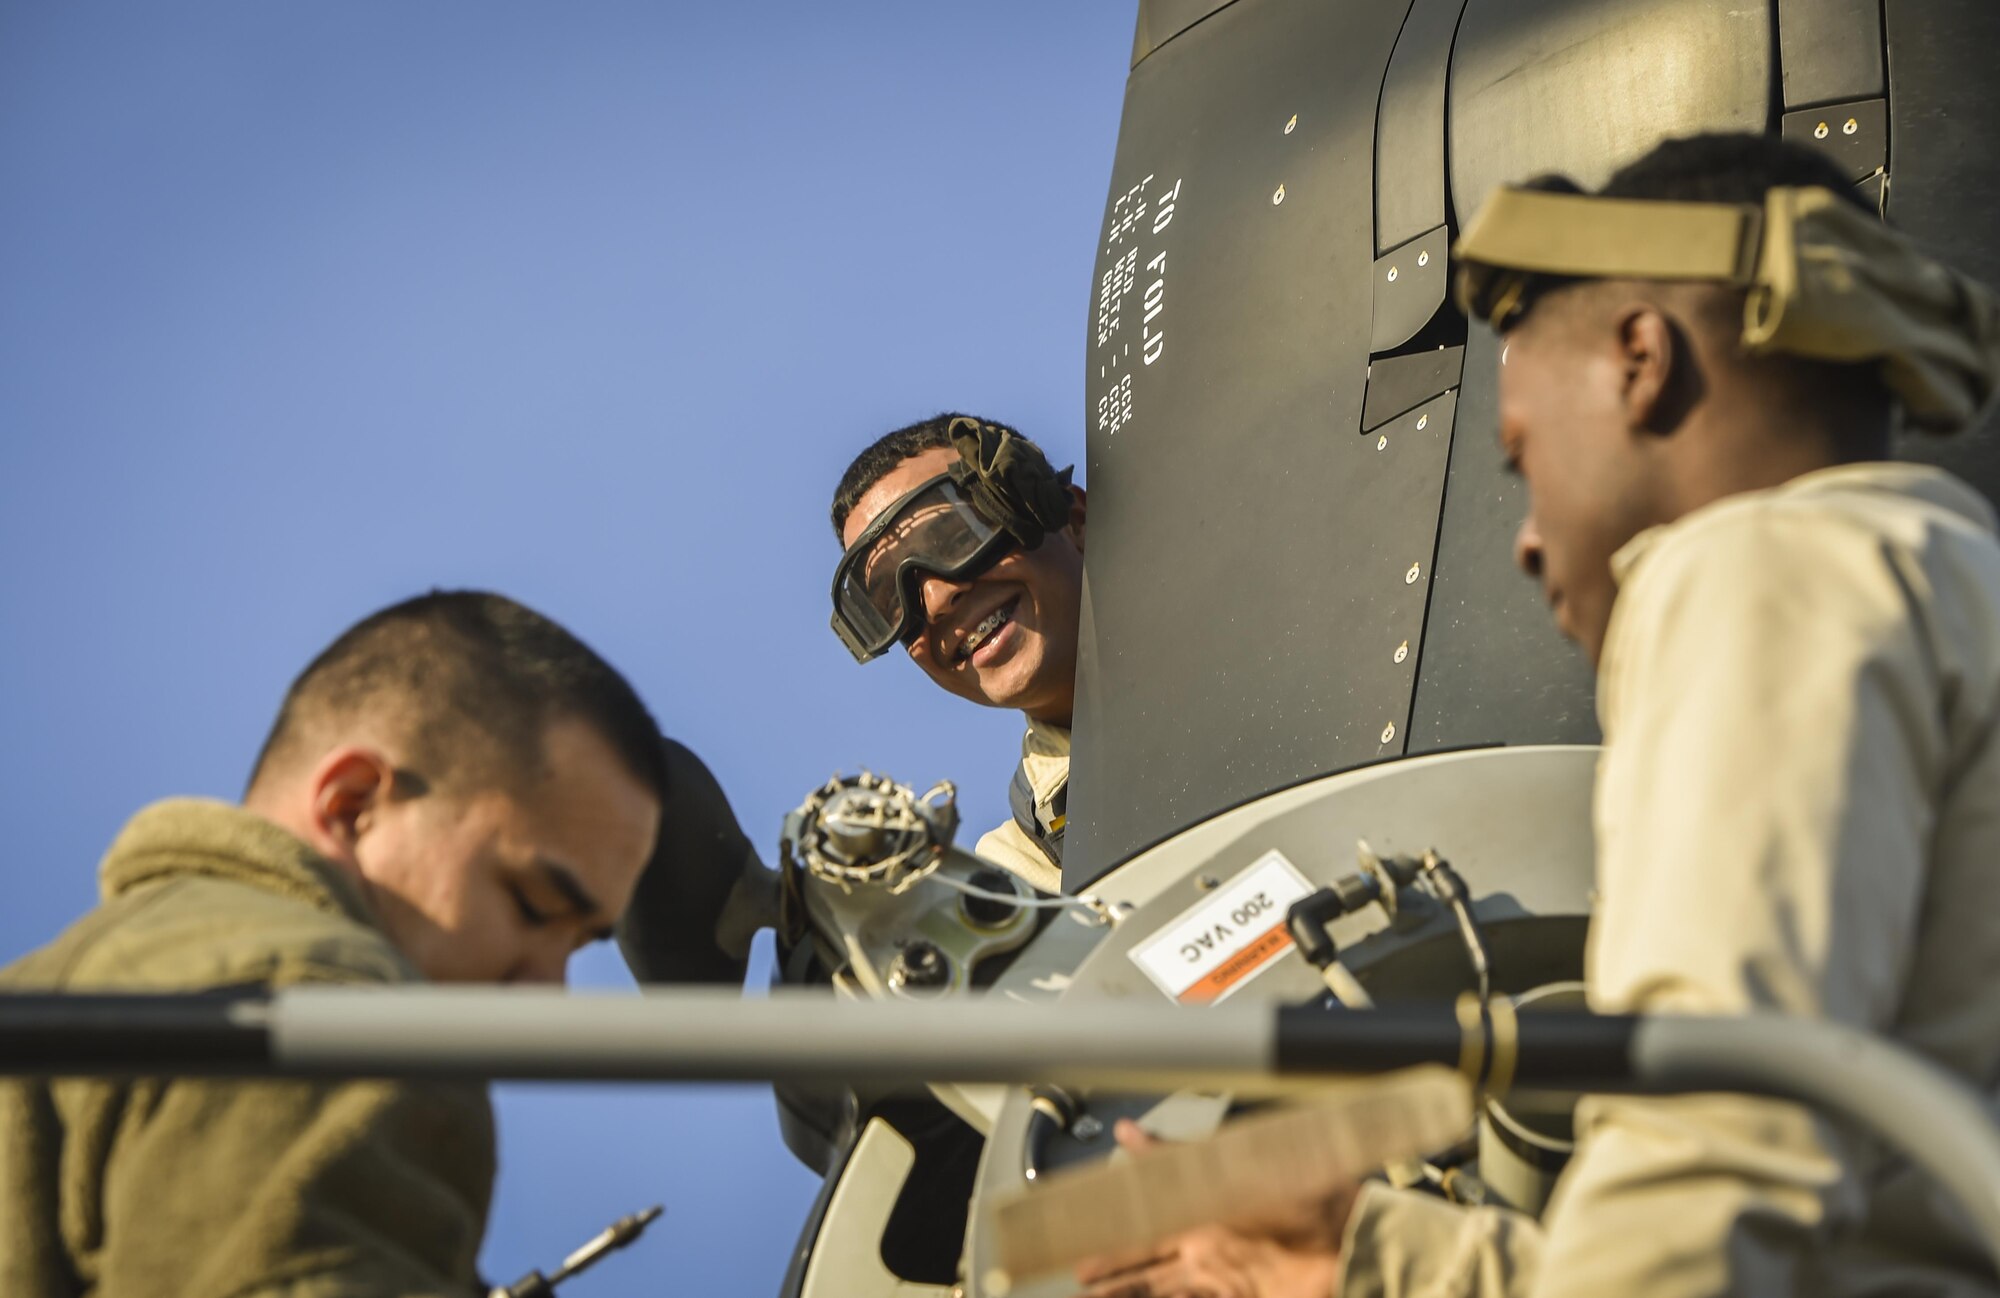 Senior Airman Benjamin Delone, a crew chief with the 801st Special Operations Aircraft Maintenance Squadron, smiles during routine maintenance of a CV-22 Osprey tiltrotor aircraft at Hurlburt Field, Fla., Jan. 9, 2017. The 801st SOAMXS maintenance responsibilities include servicing, phase inspections, troubleshooting, repairs, modifications and launch and recovery of the aircraft. (U.S. Air Force photo by Staff Sgt. Christopher Callaway)